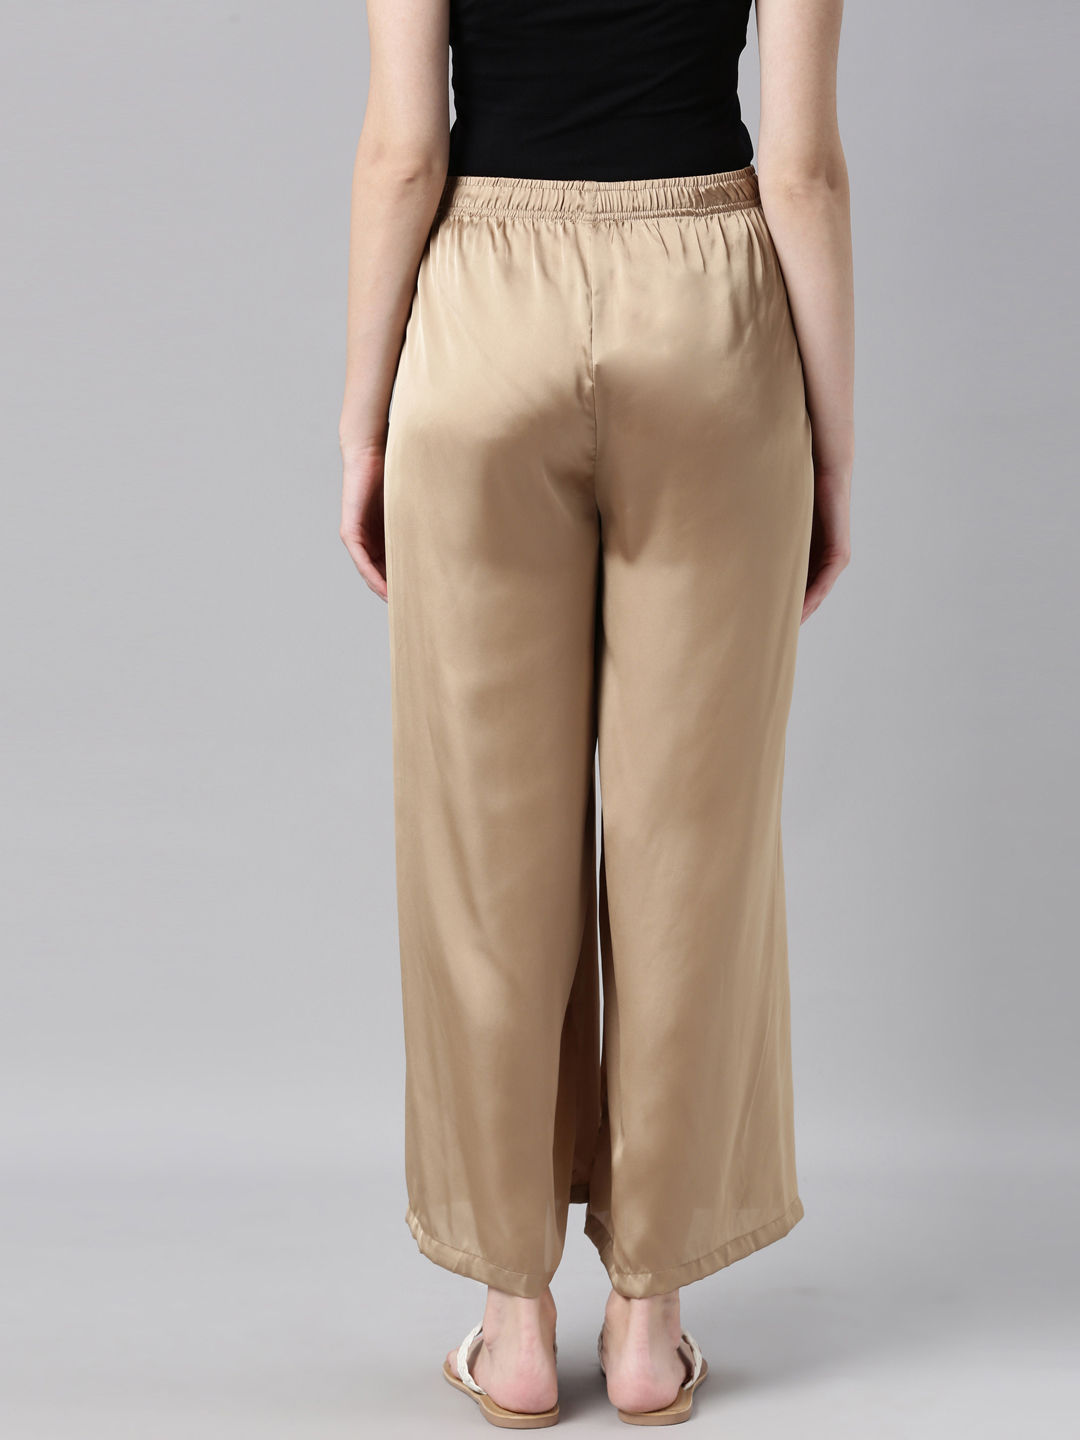 Sexy Yellow Gold Zipper Detail High Waist Palazzo Pants – SEXY AFFORDABLE  CLOTHING